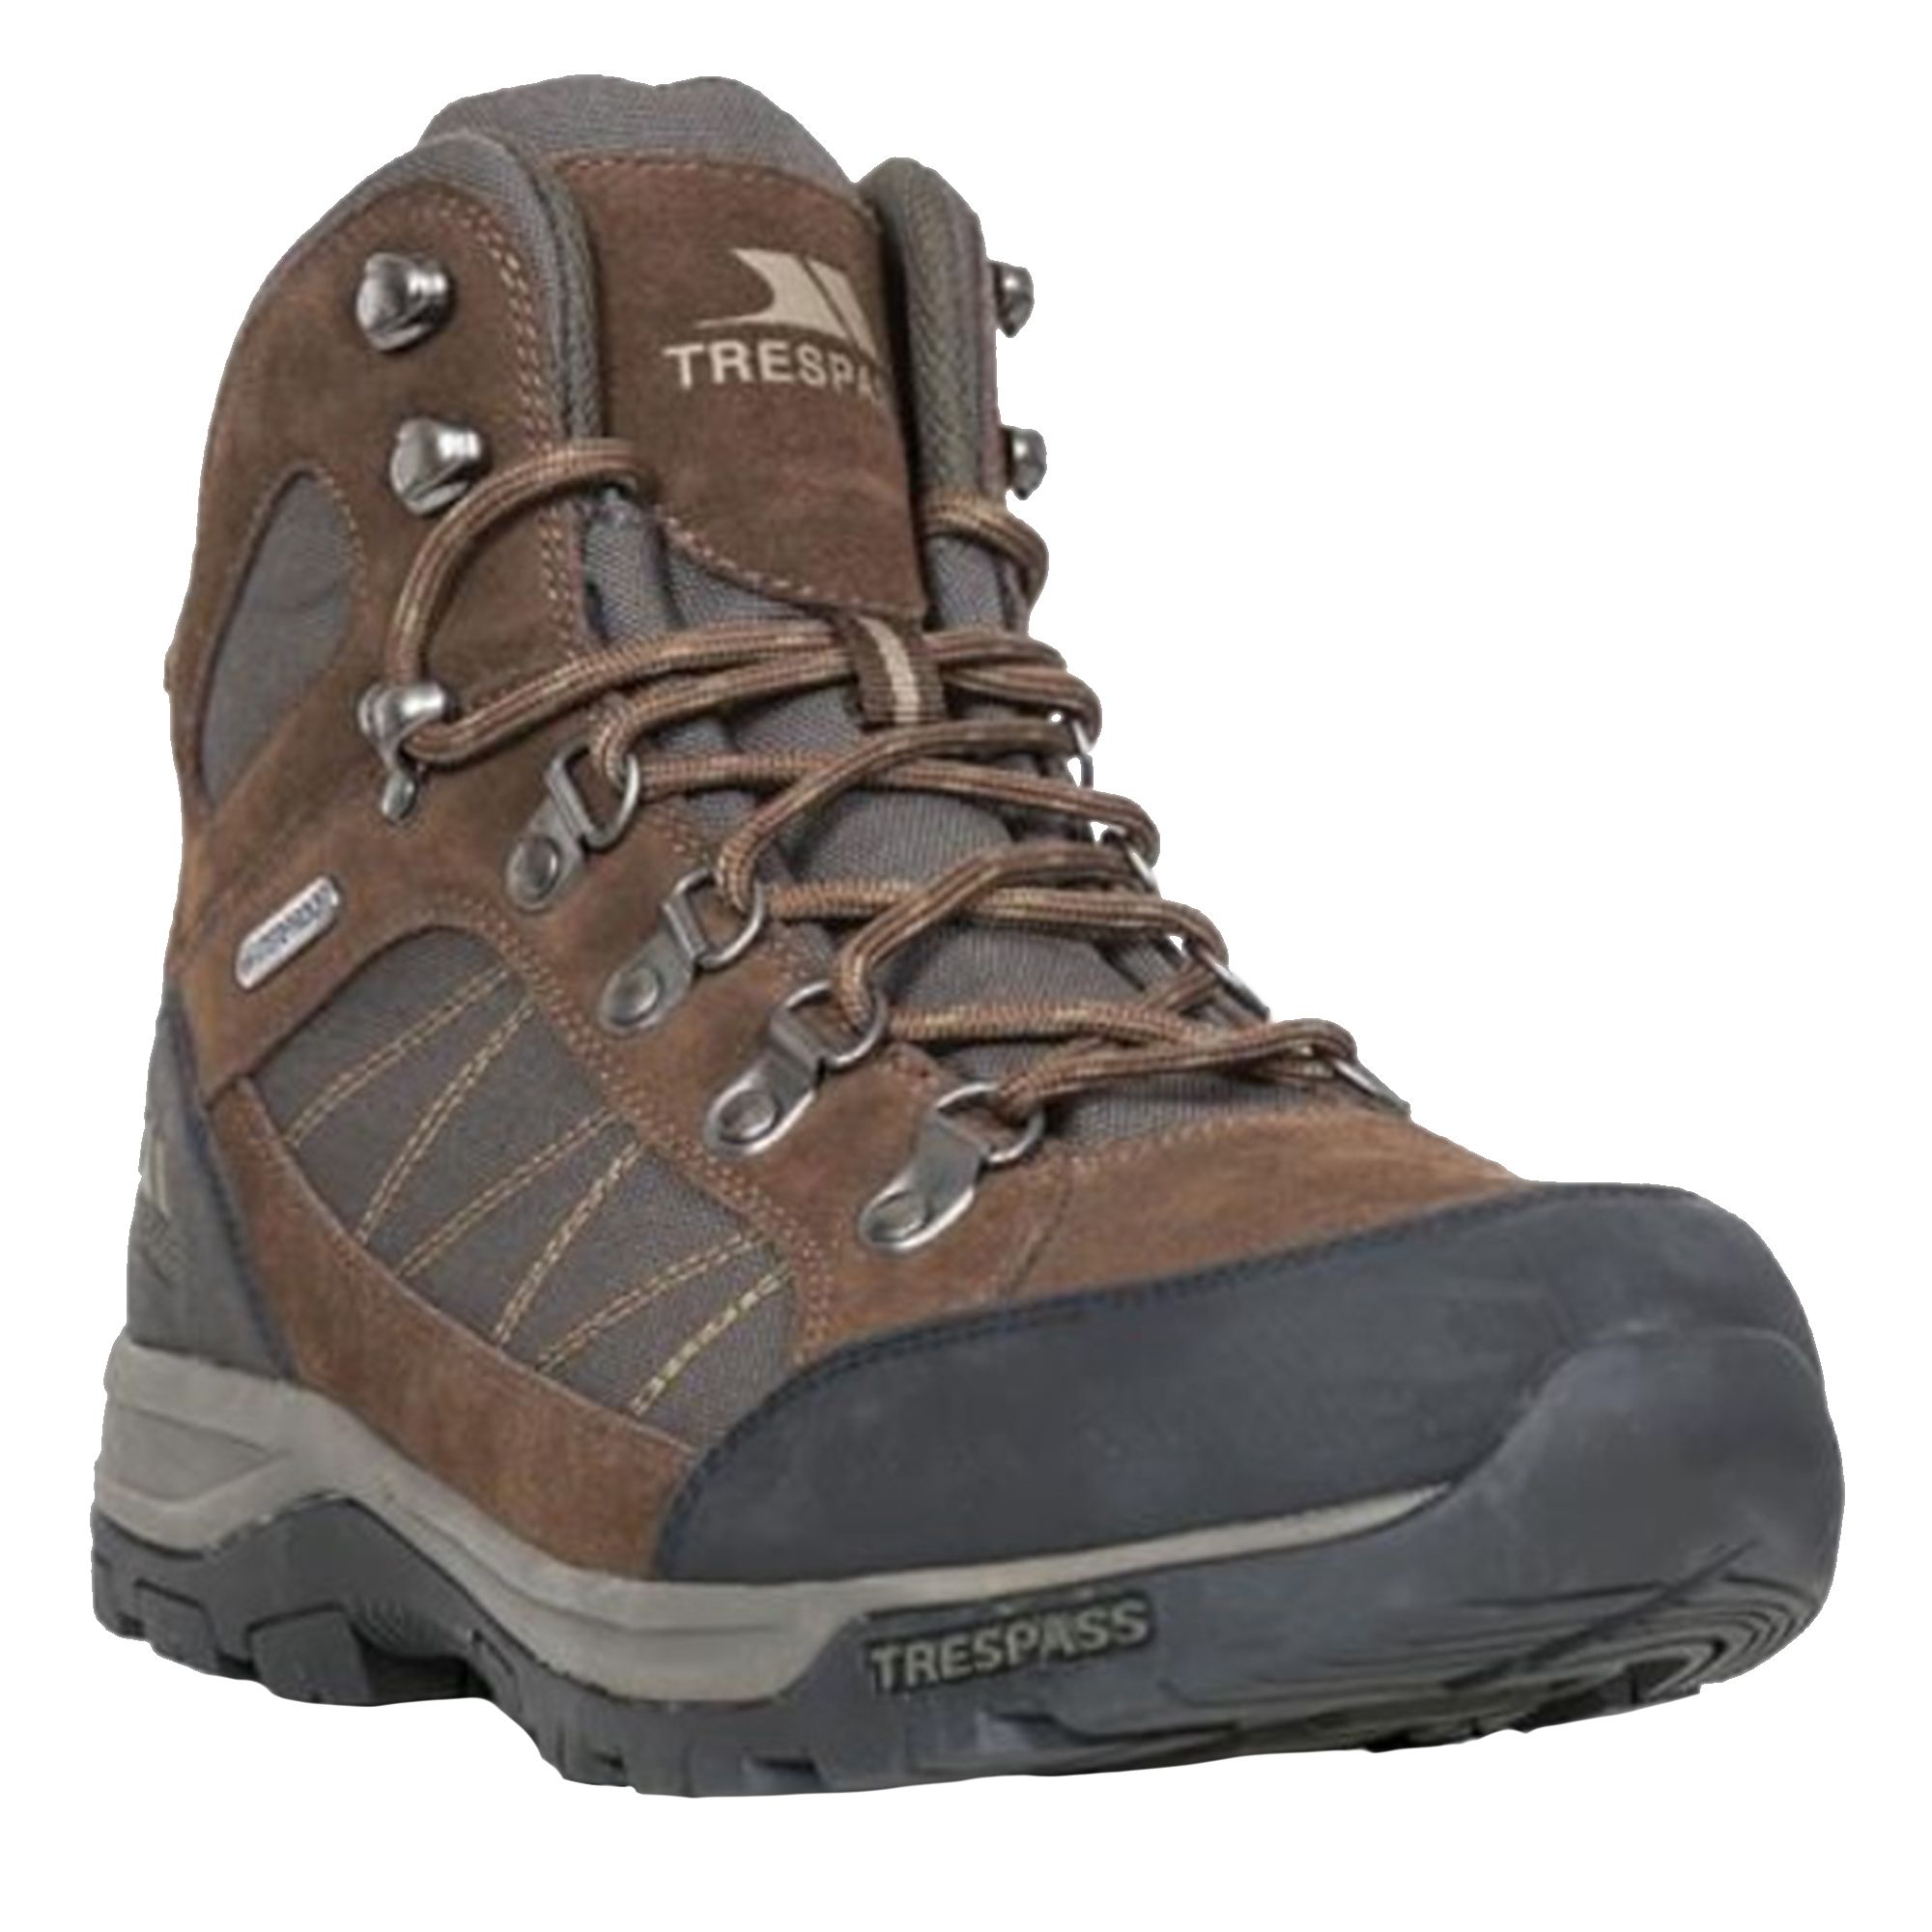 Trail mid cut hiking boots. Waterproof and breathable membrane. Gussetted tongue. Protective and durable rubber toe guard. Ankle supportive cushioned collar and tongue. Arch stabilising and supportive steel shank. Cushioned footbed. Durable traction outsole. Upper: textile/cow suede/PU/rubber. Lining: textile. Outsole: moulded EVA/rubber.